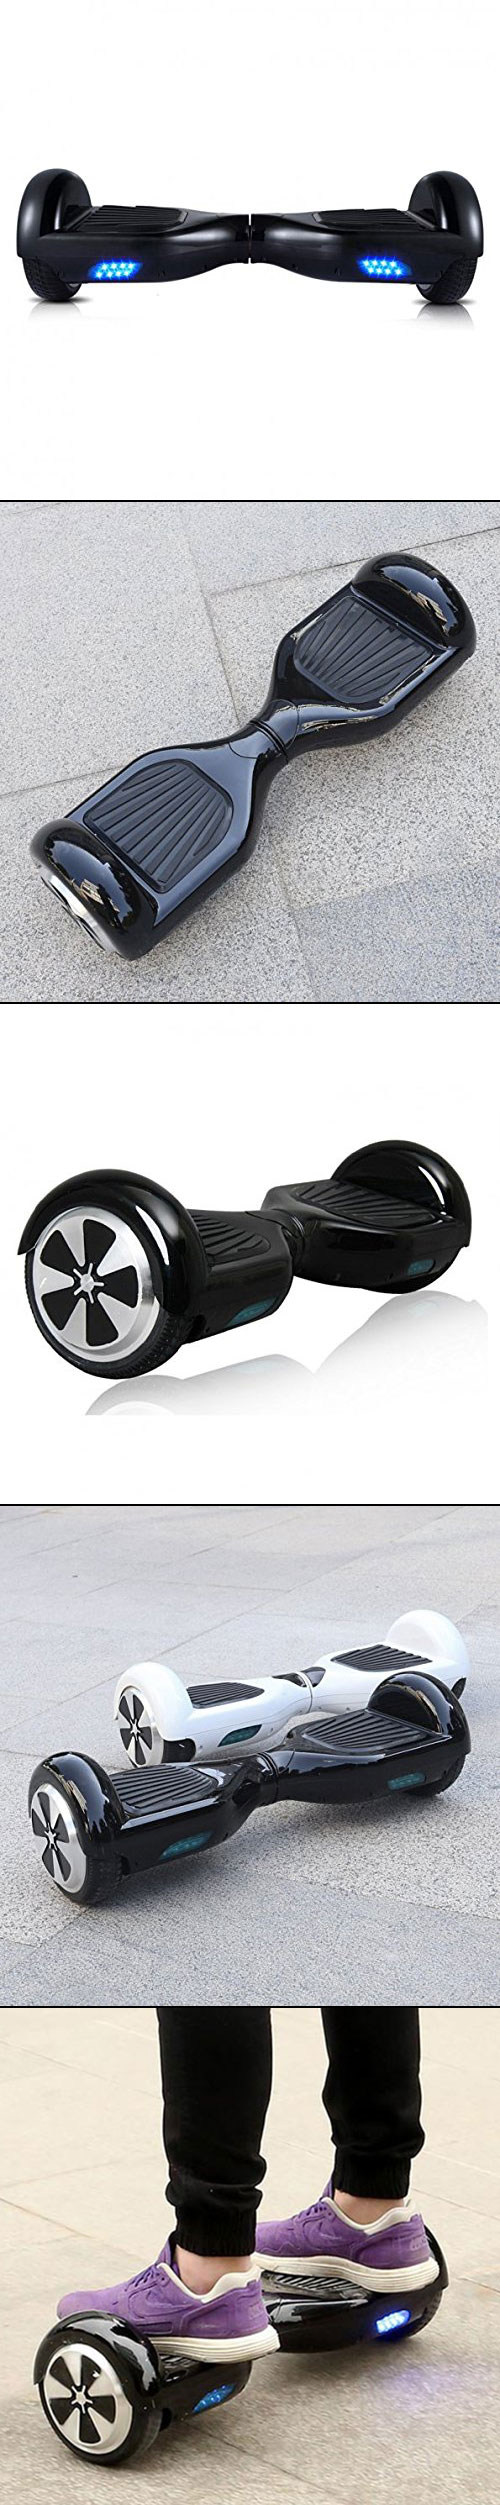 monorover-r2-smart-scooter